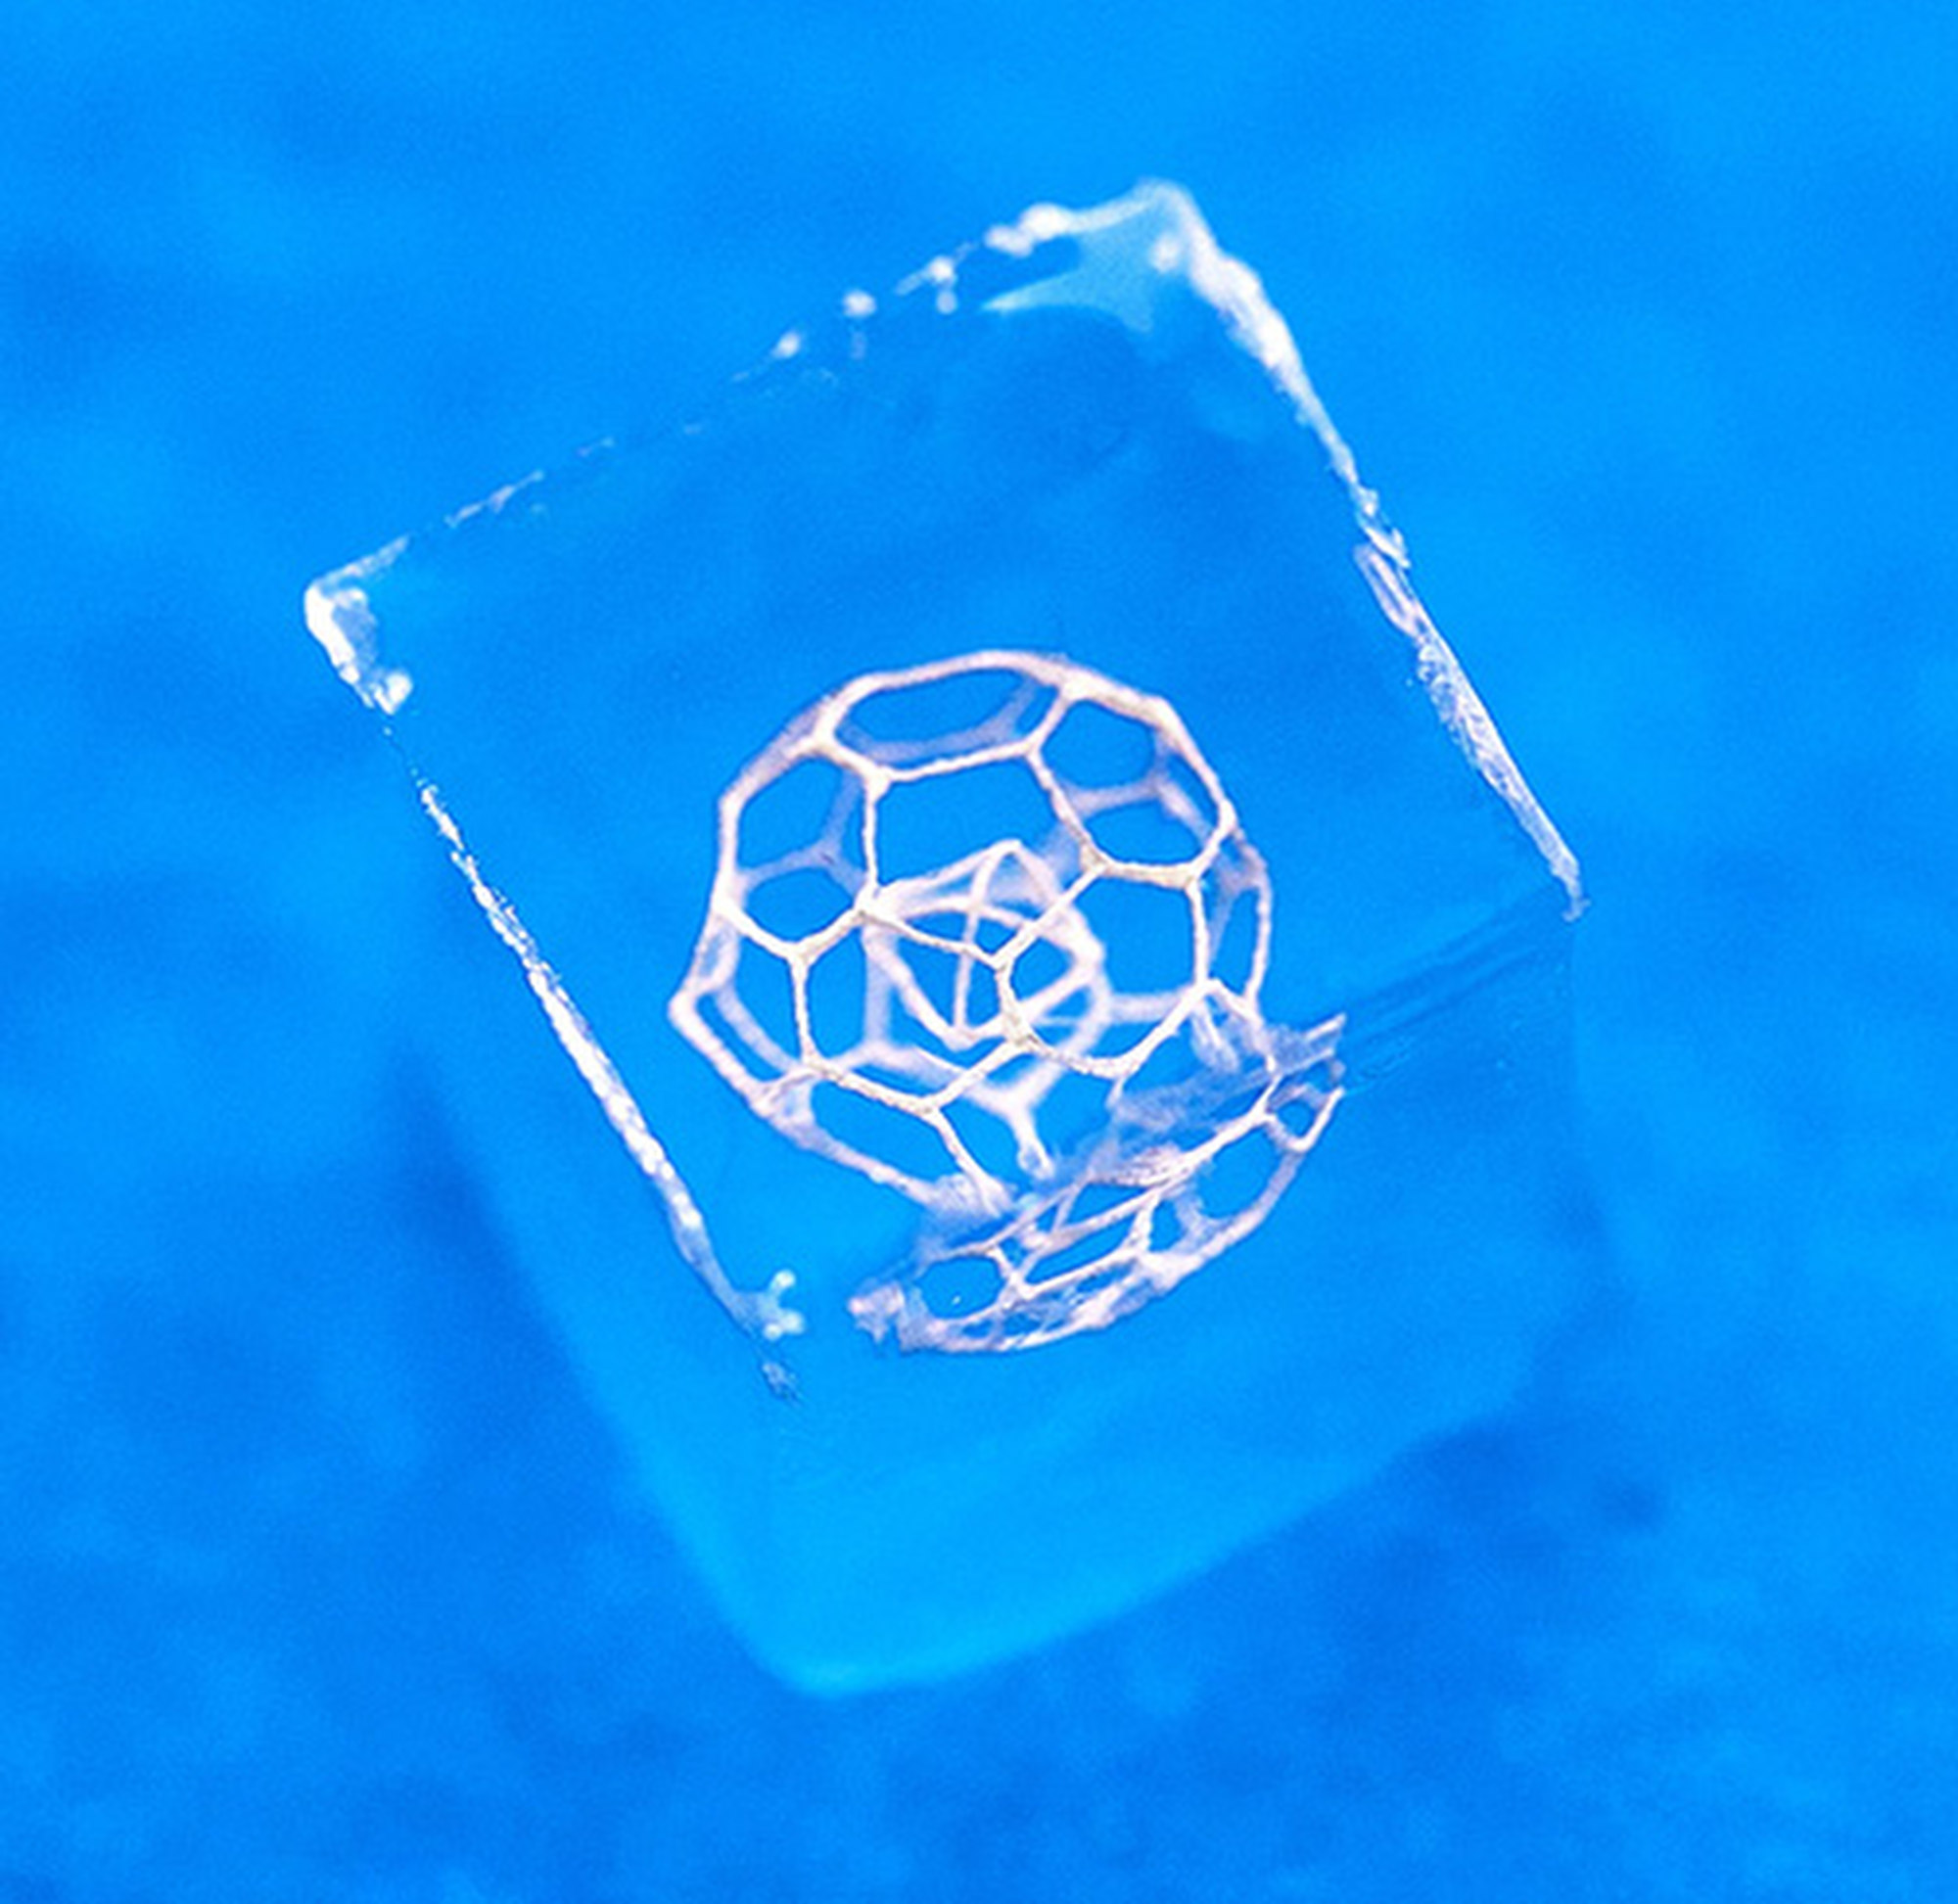 Hydrogel can be used to print 3D structures in free form, according to the study’s first author. Photo: Handout